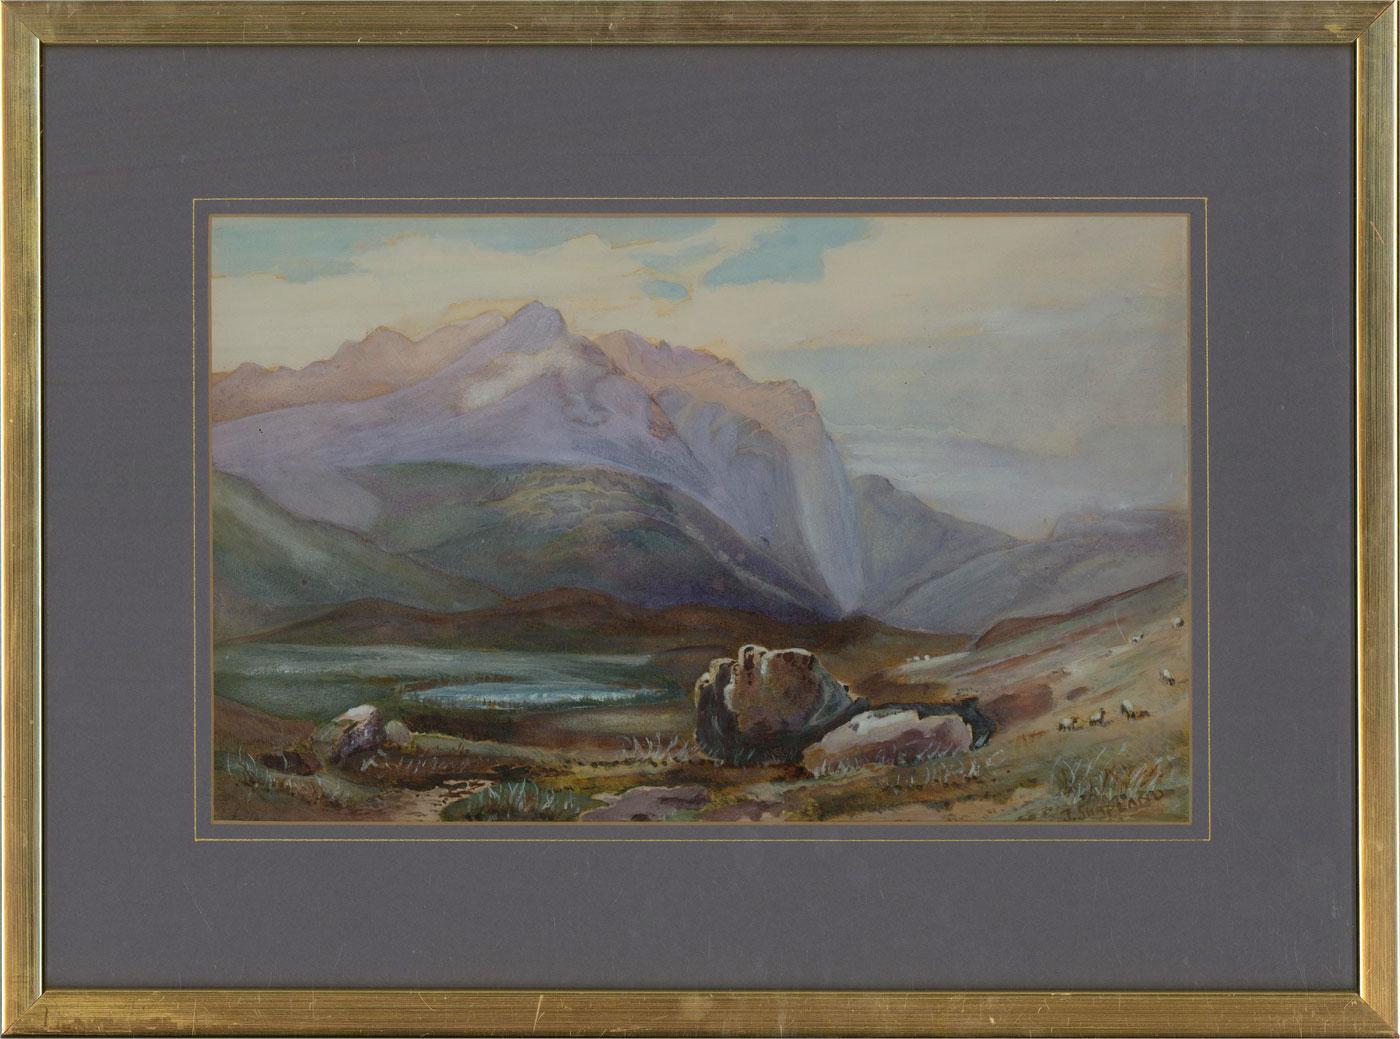 A dramatic mountain landscape with sheep grazing in the foreground. Presented in a blue mount with gold detailing and a gilt-effect frame. Signed to the lower-right corner. On watercolour paper.